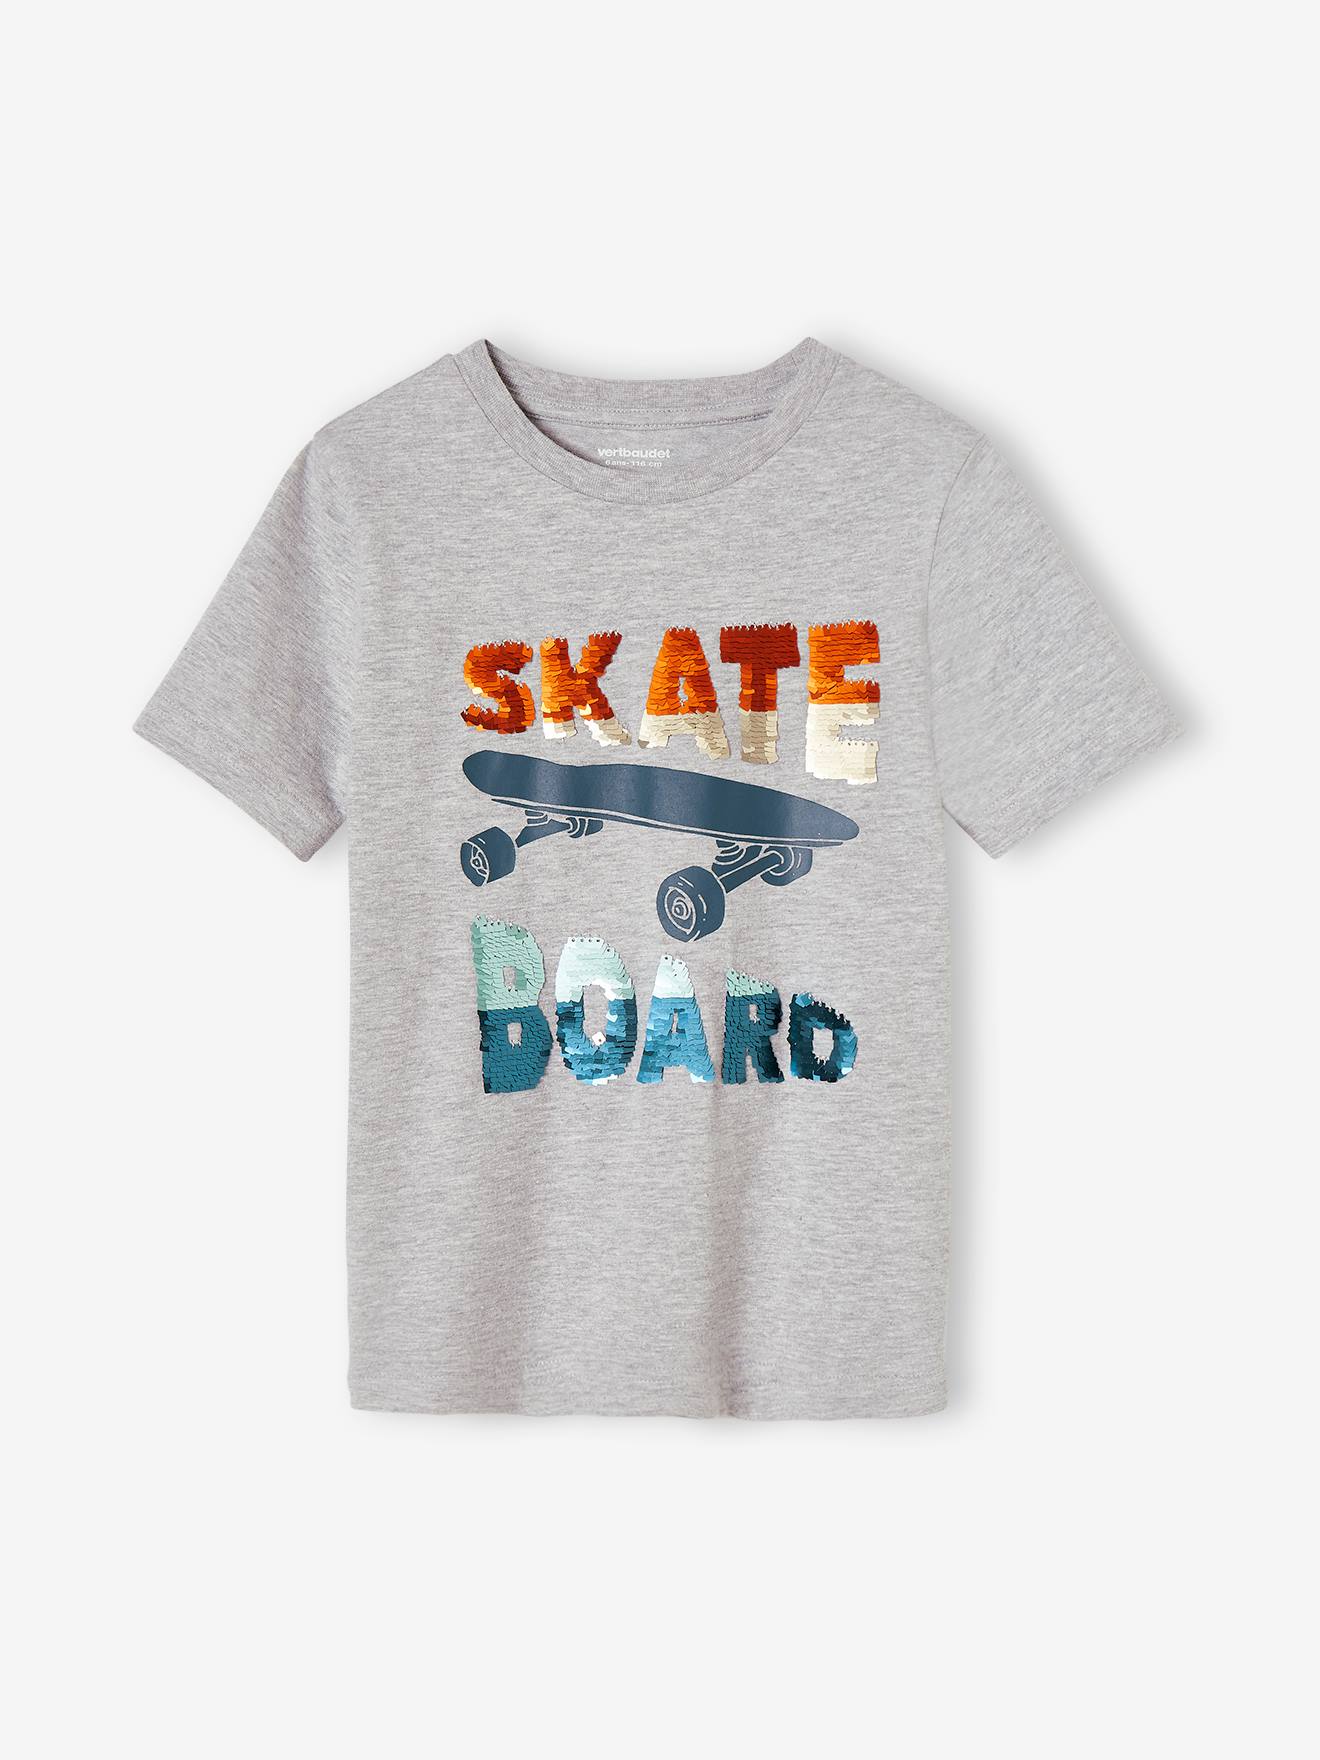 Sequinned T-Shirt for Boys marl grey